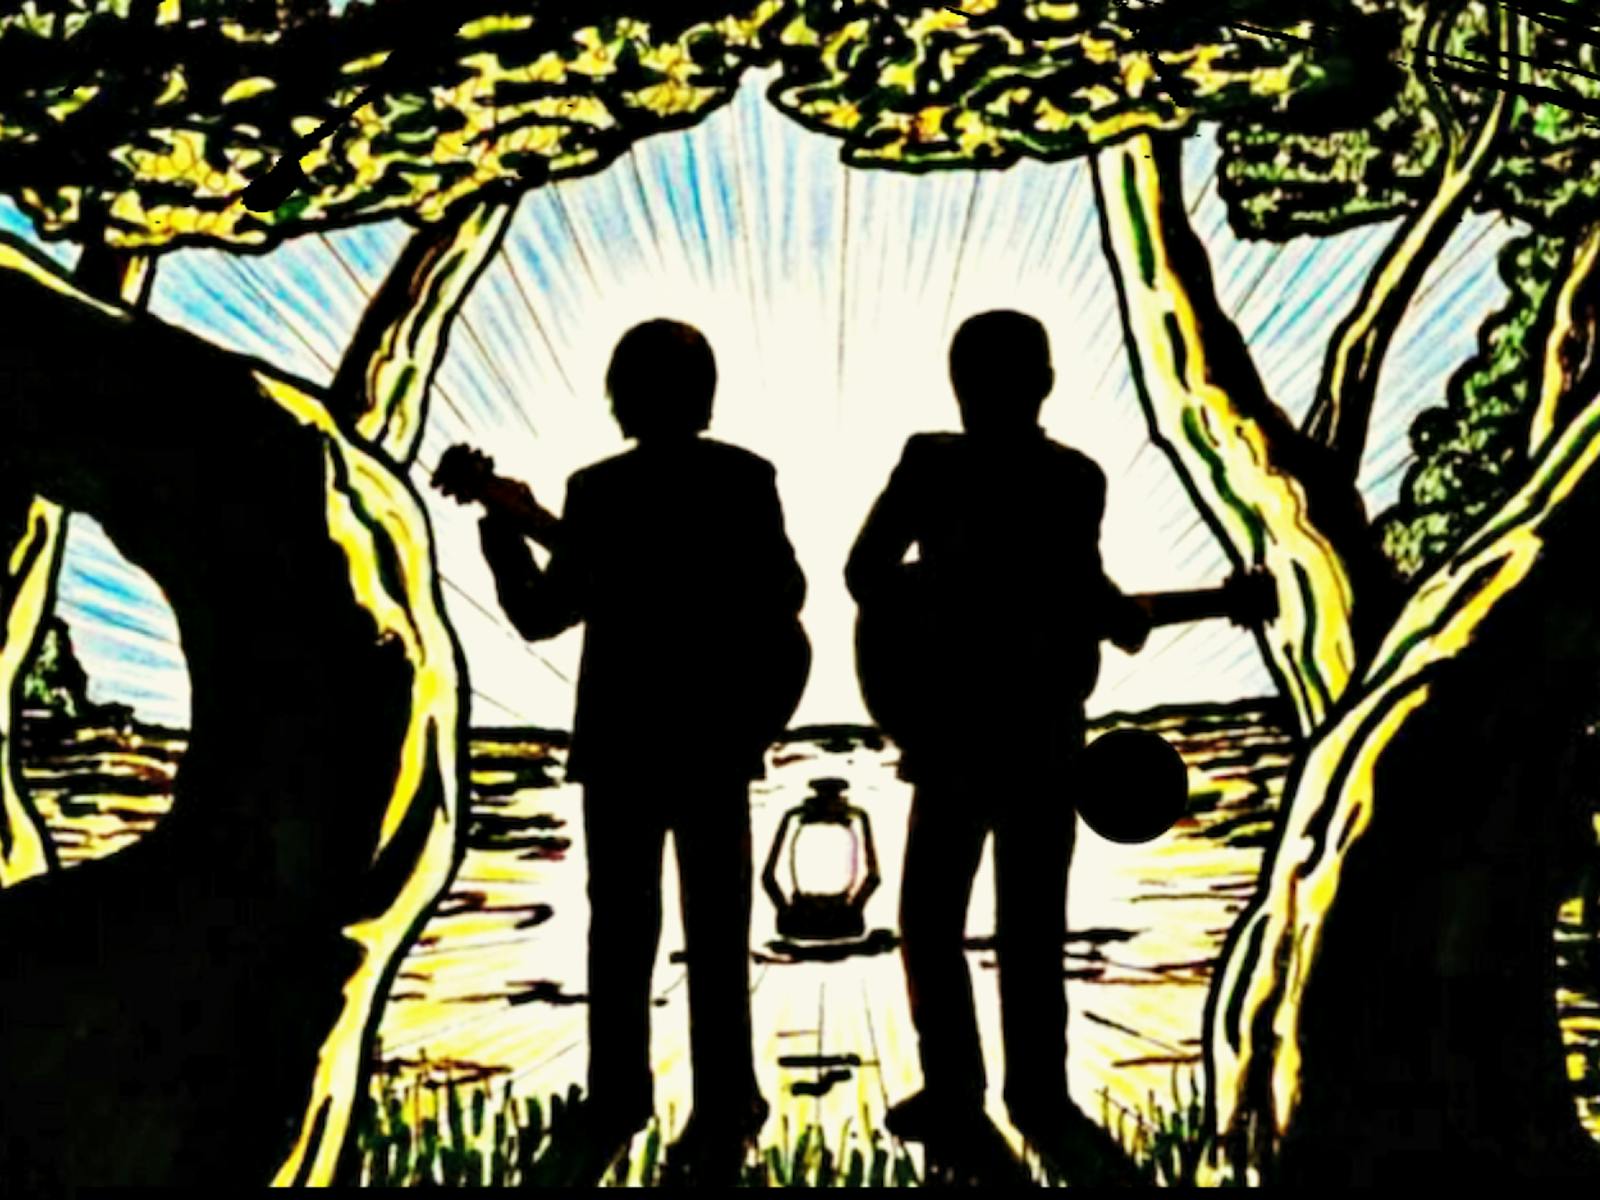 Image for A Tribute to Paul Kelly and Neil Finn - Crowded House